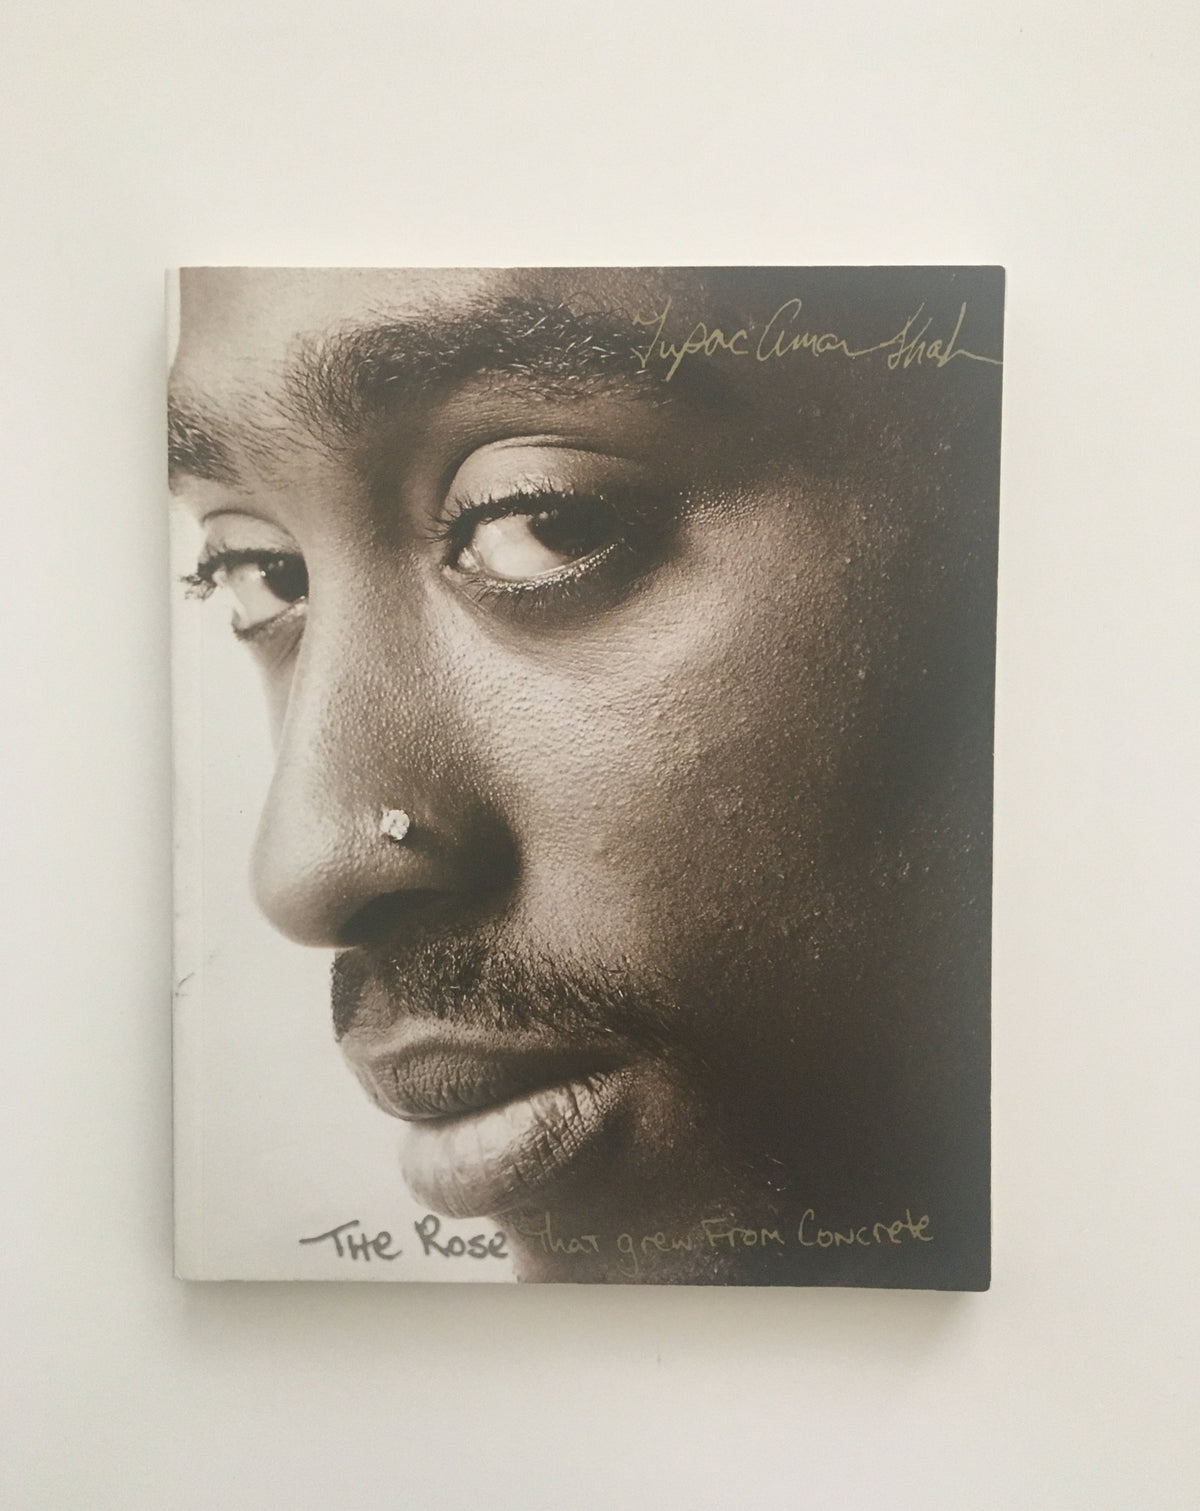 The Rose That Grew From the Concrete by Tupac Shakur, Book, Ten Dollar Books, Ten Dollar Books